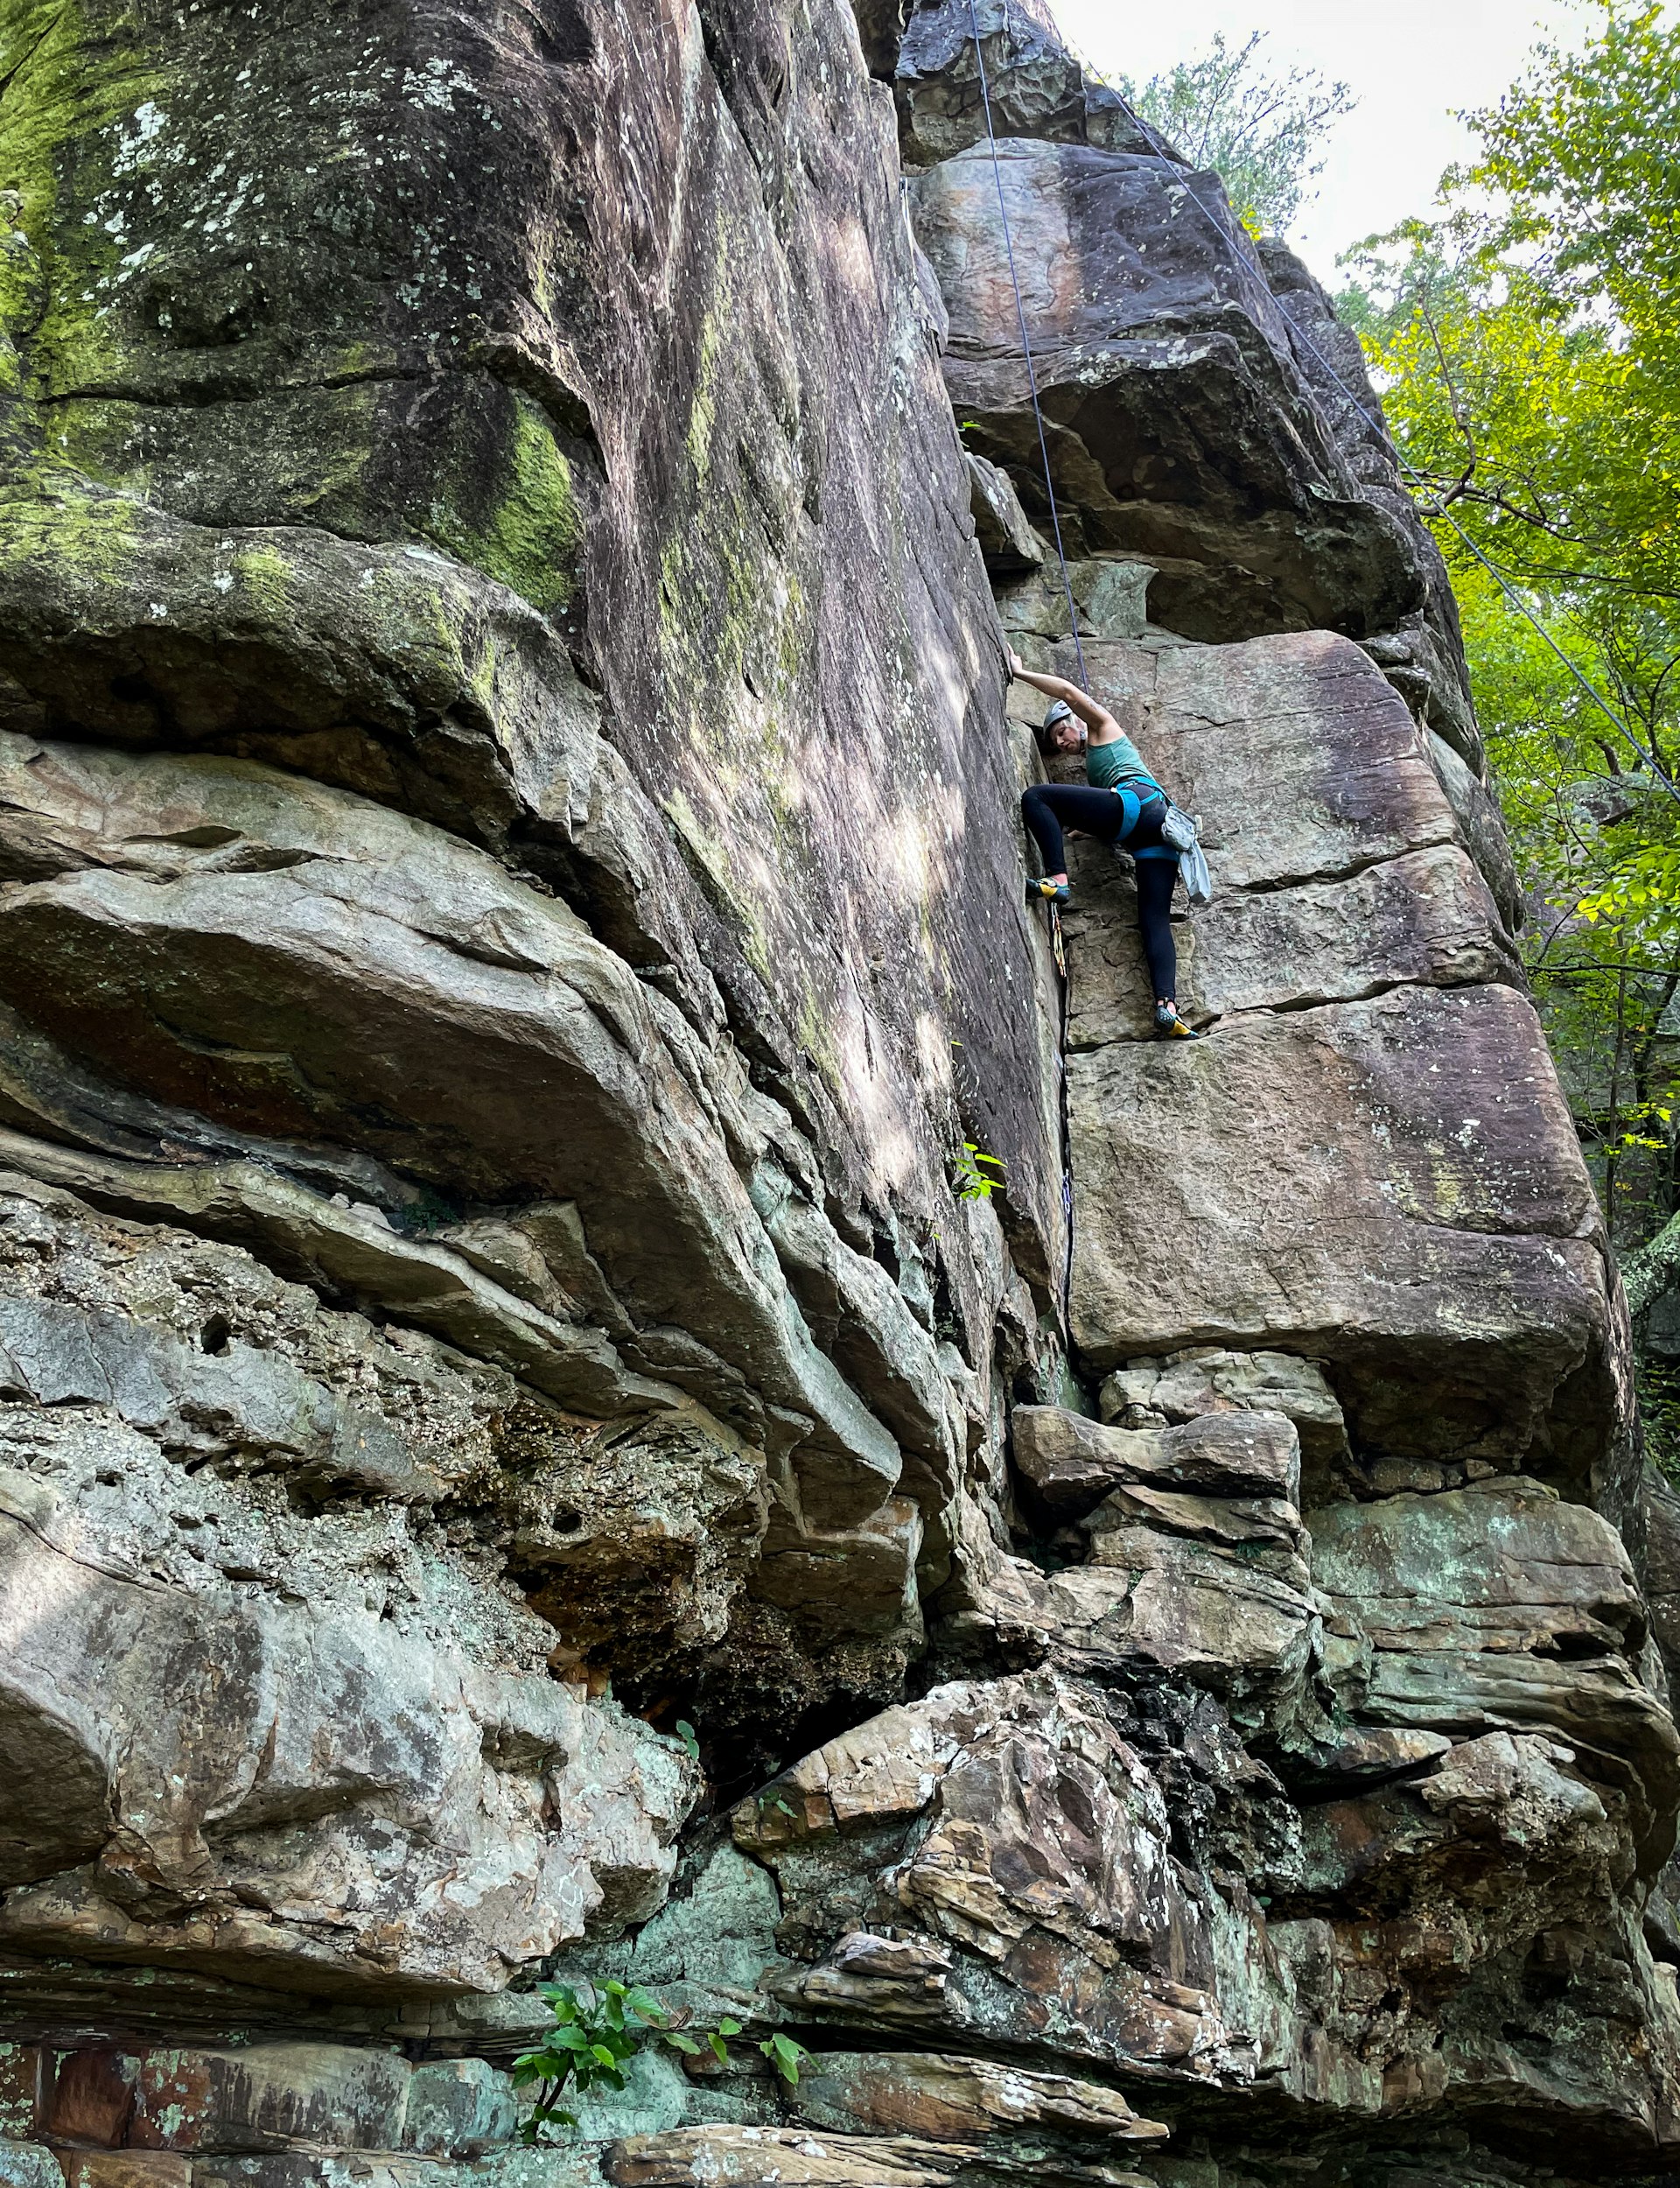 A woman in climbing gear is halfway up a rockface in Chattanooga